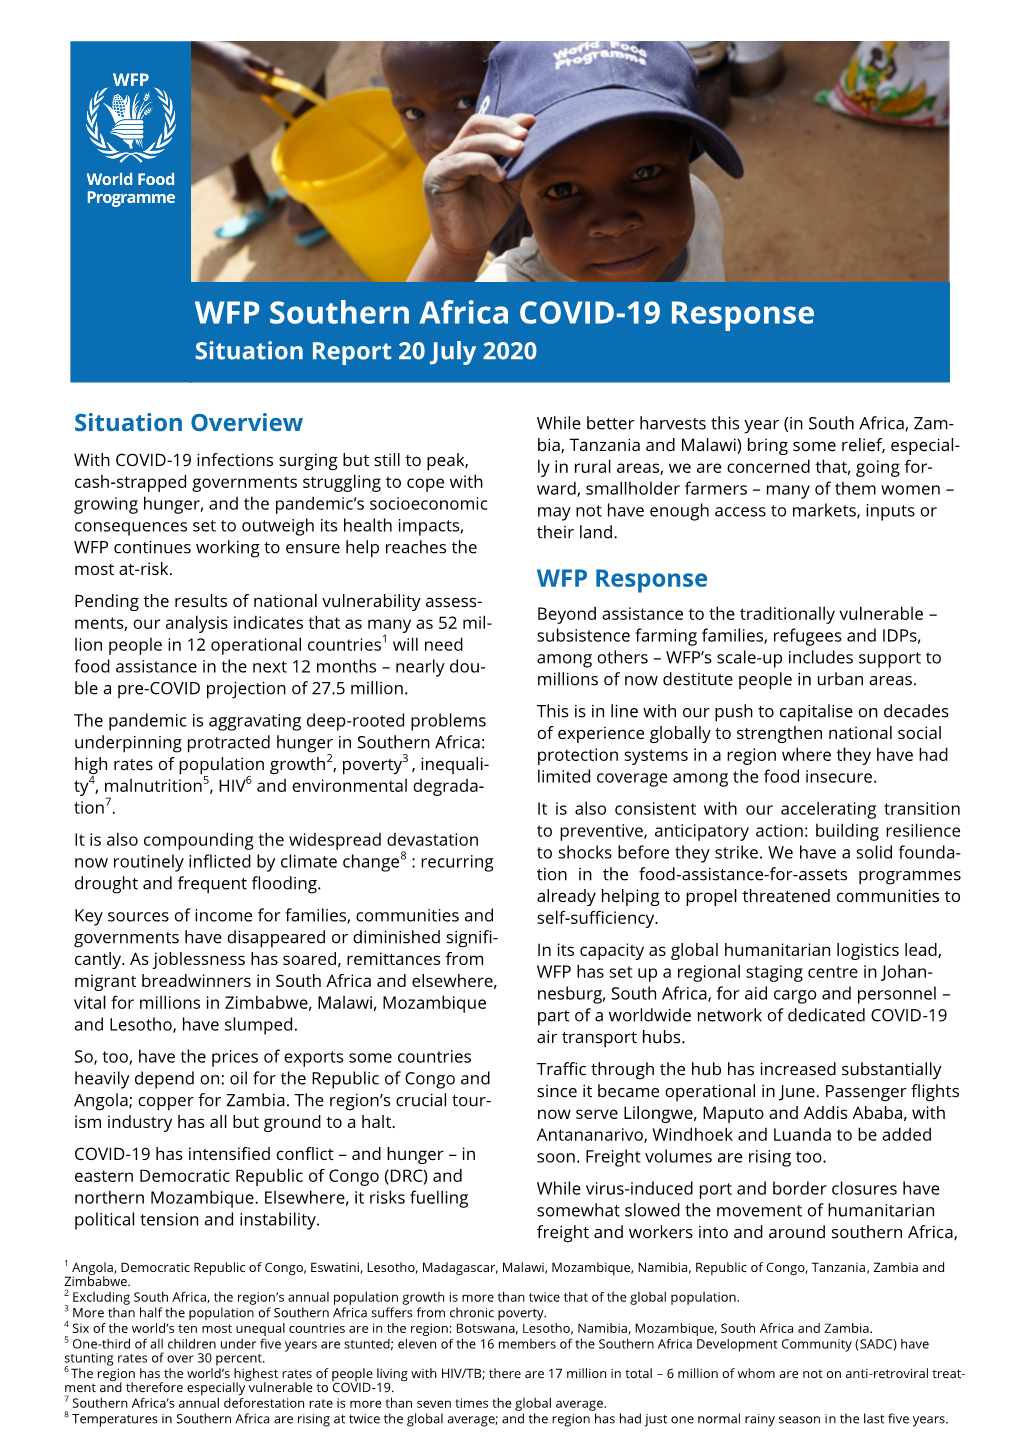 WFP Southern Africa COVID-19 Response Situation Report 20 July 2020